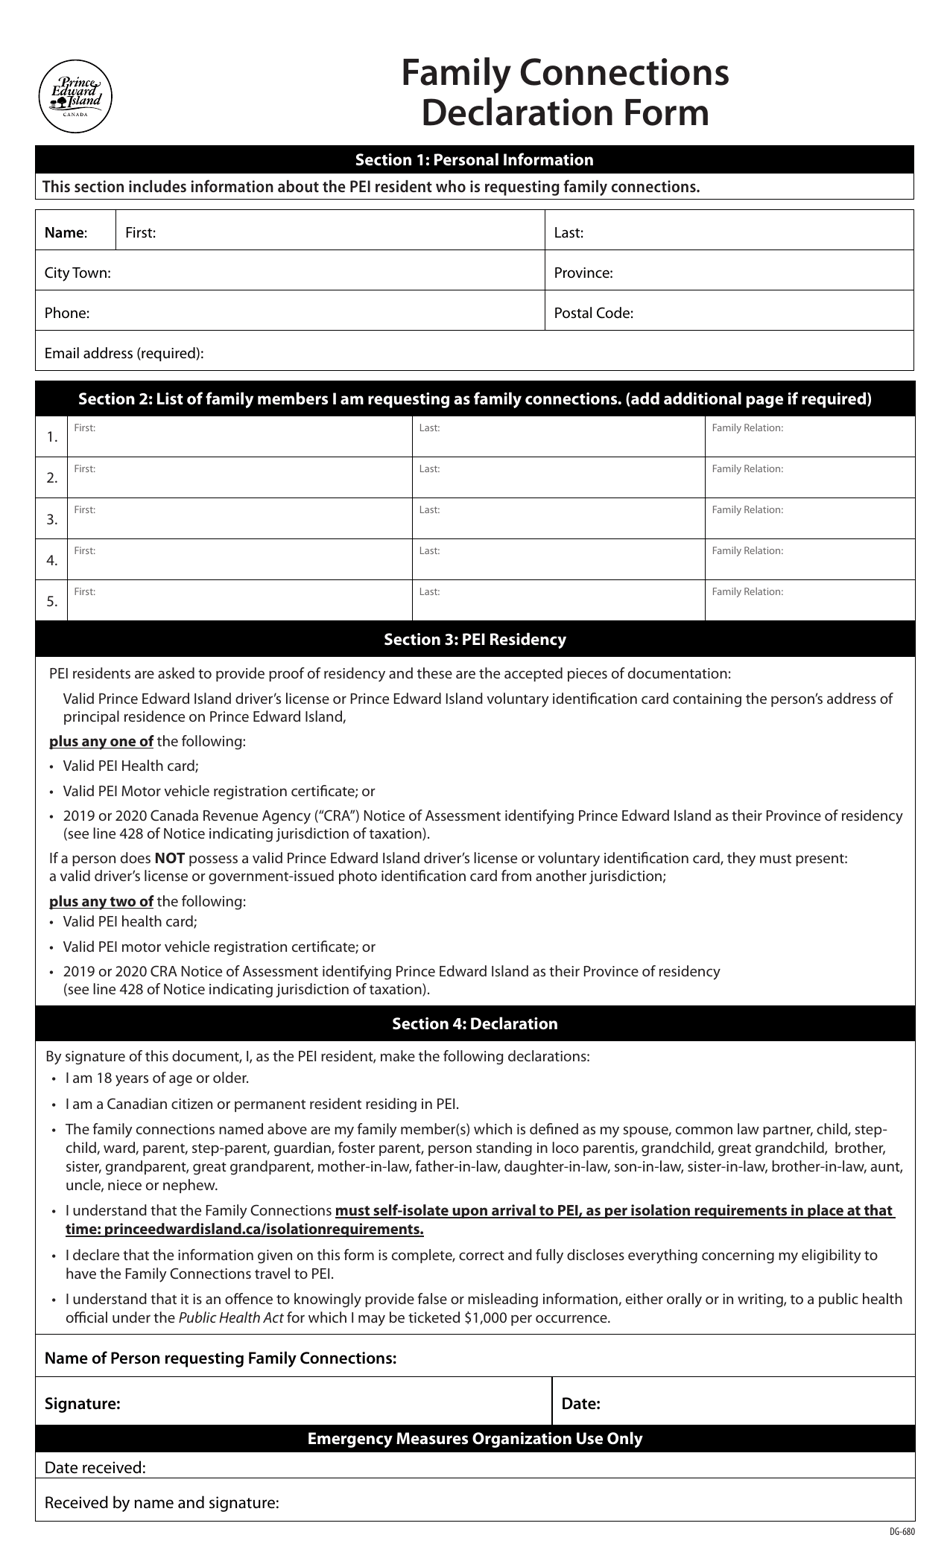 Form DG-680 Family Connections Declaration Form - Prince Edward Island, Canada, Page 1